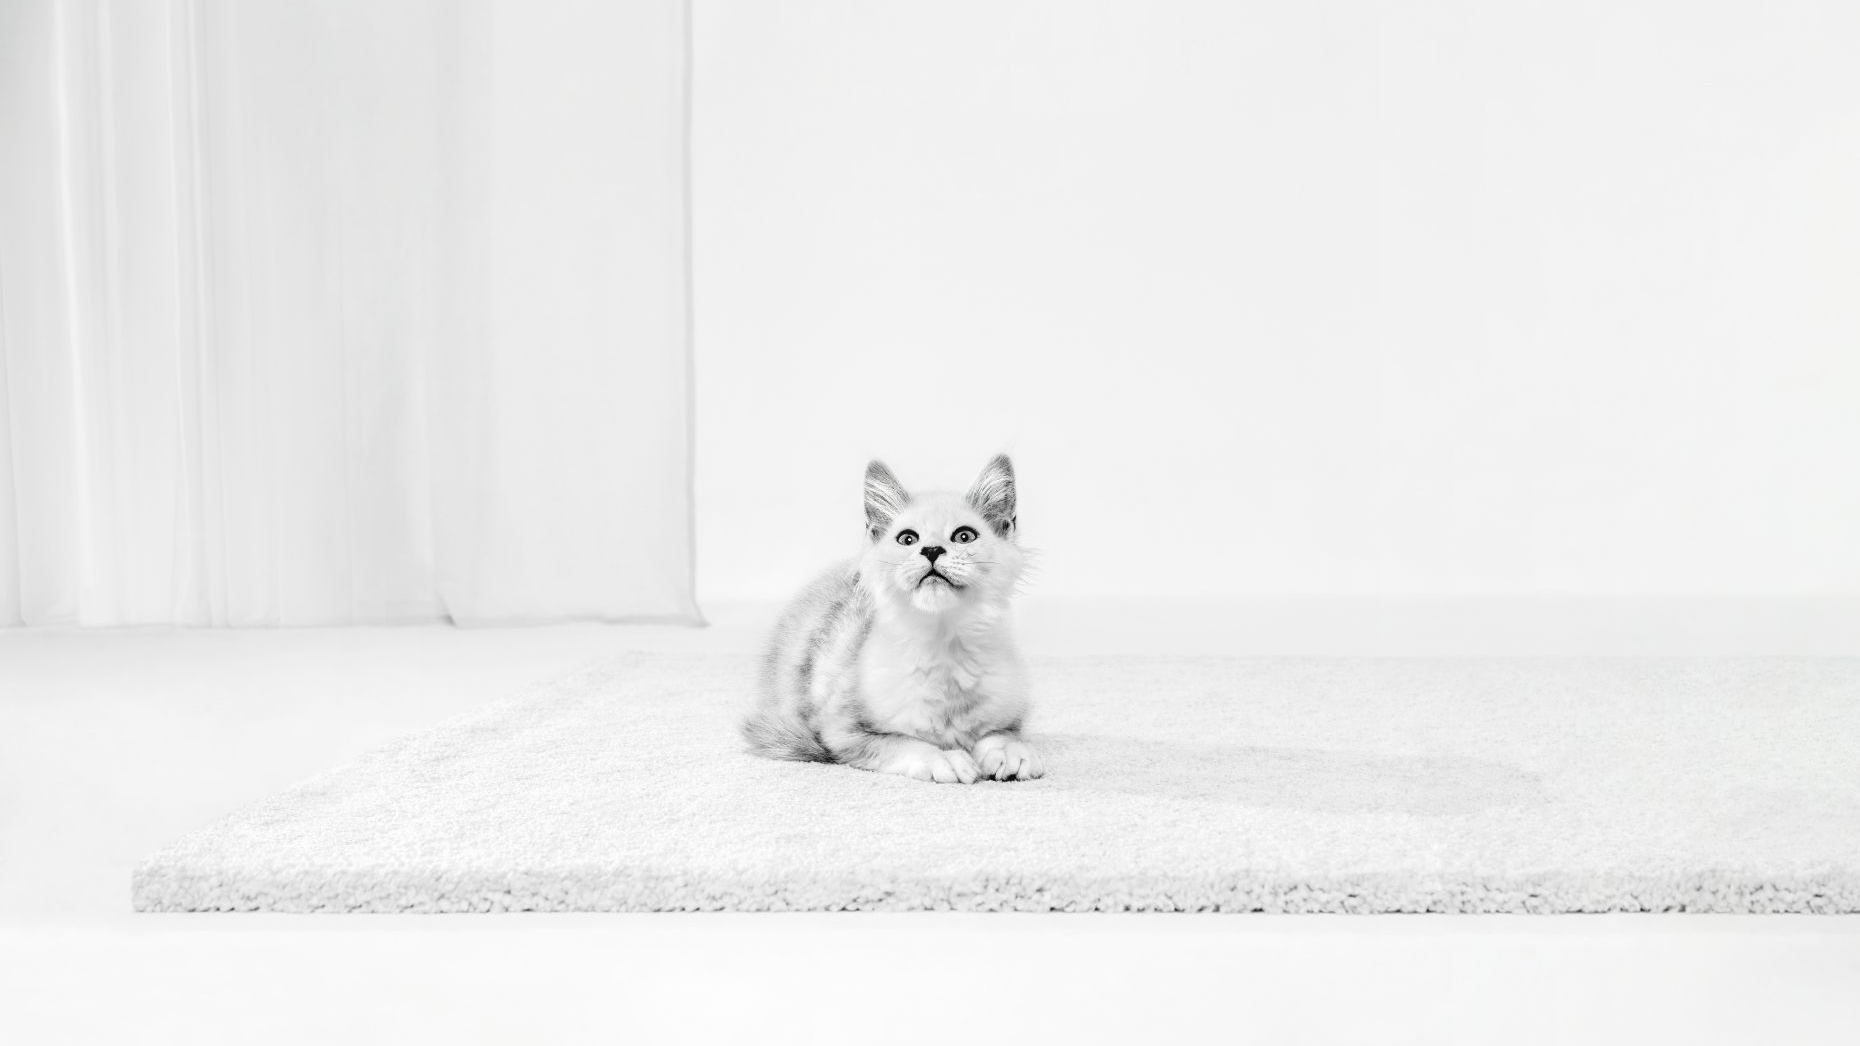 Black and White kitten on a carpet looking up